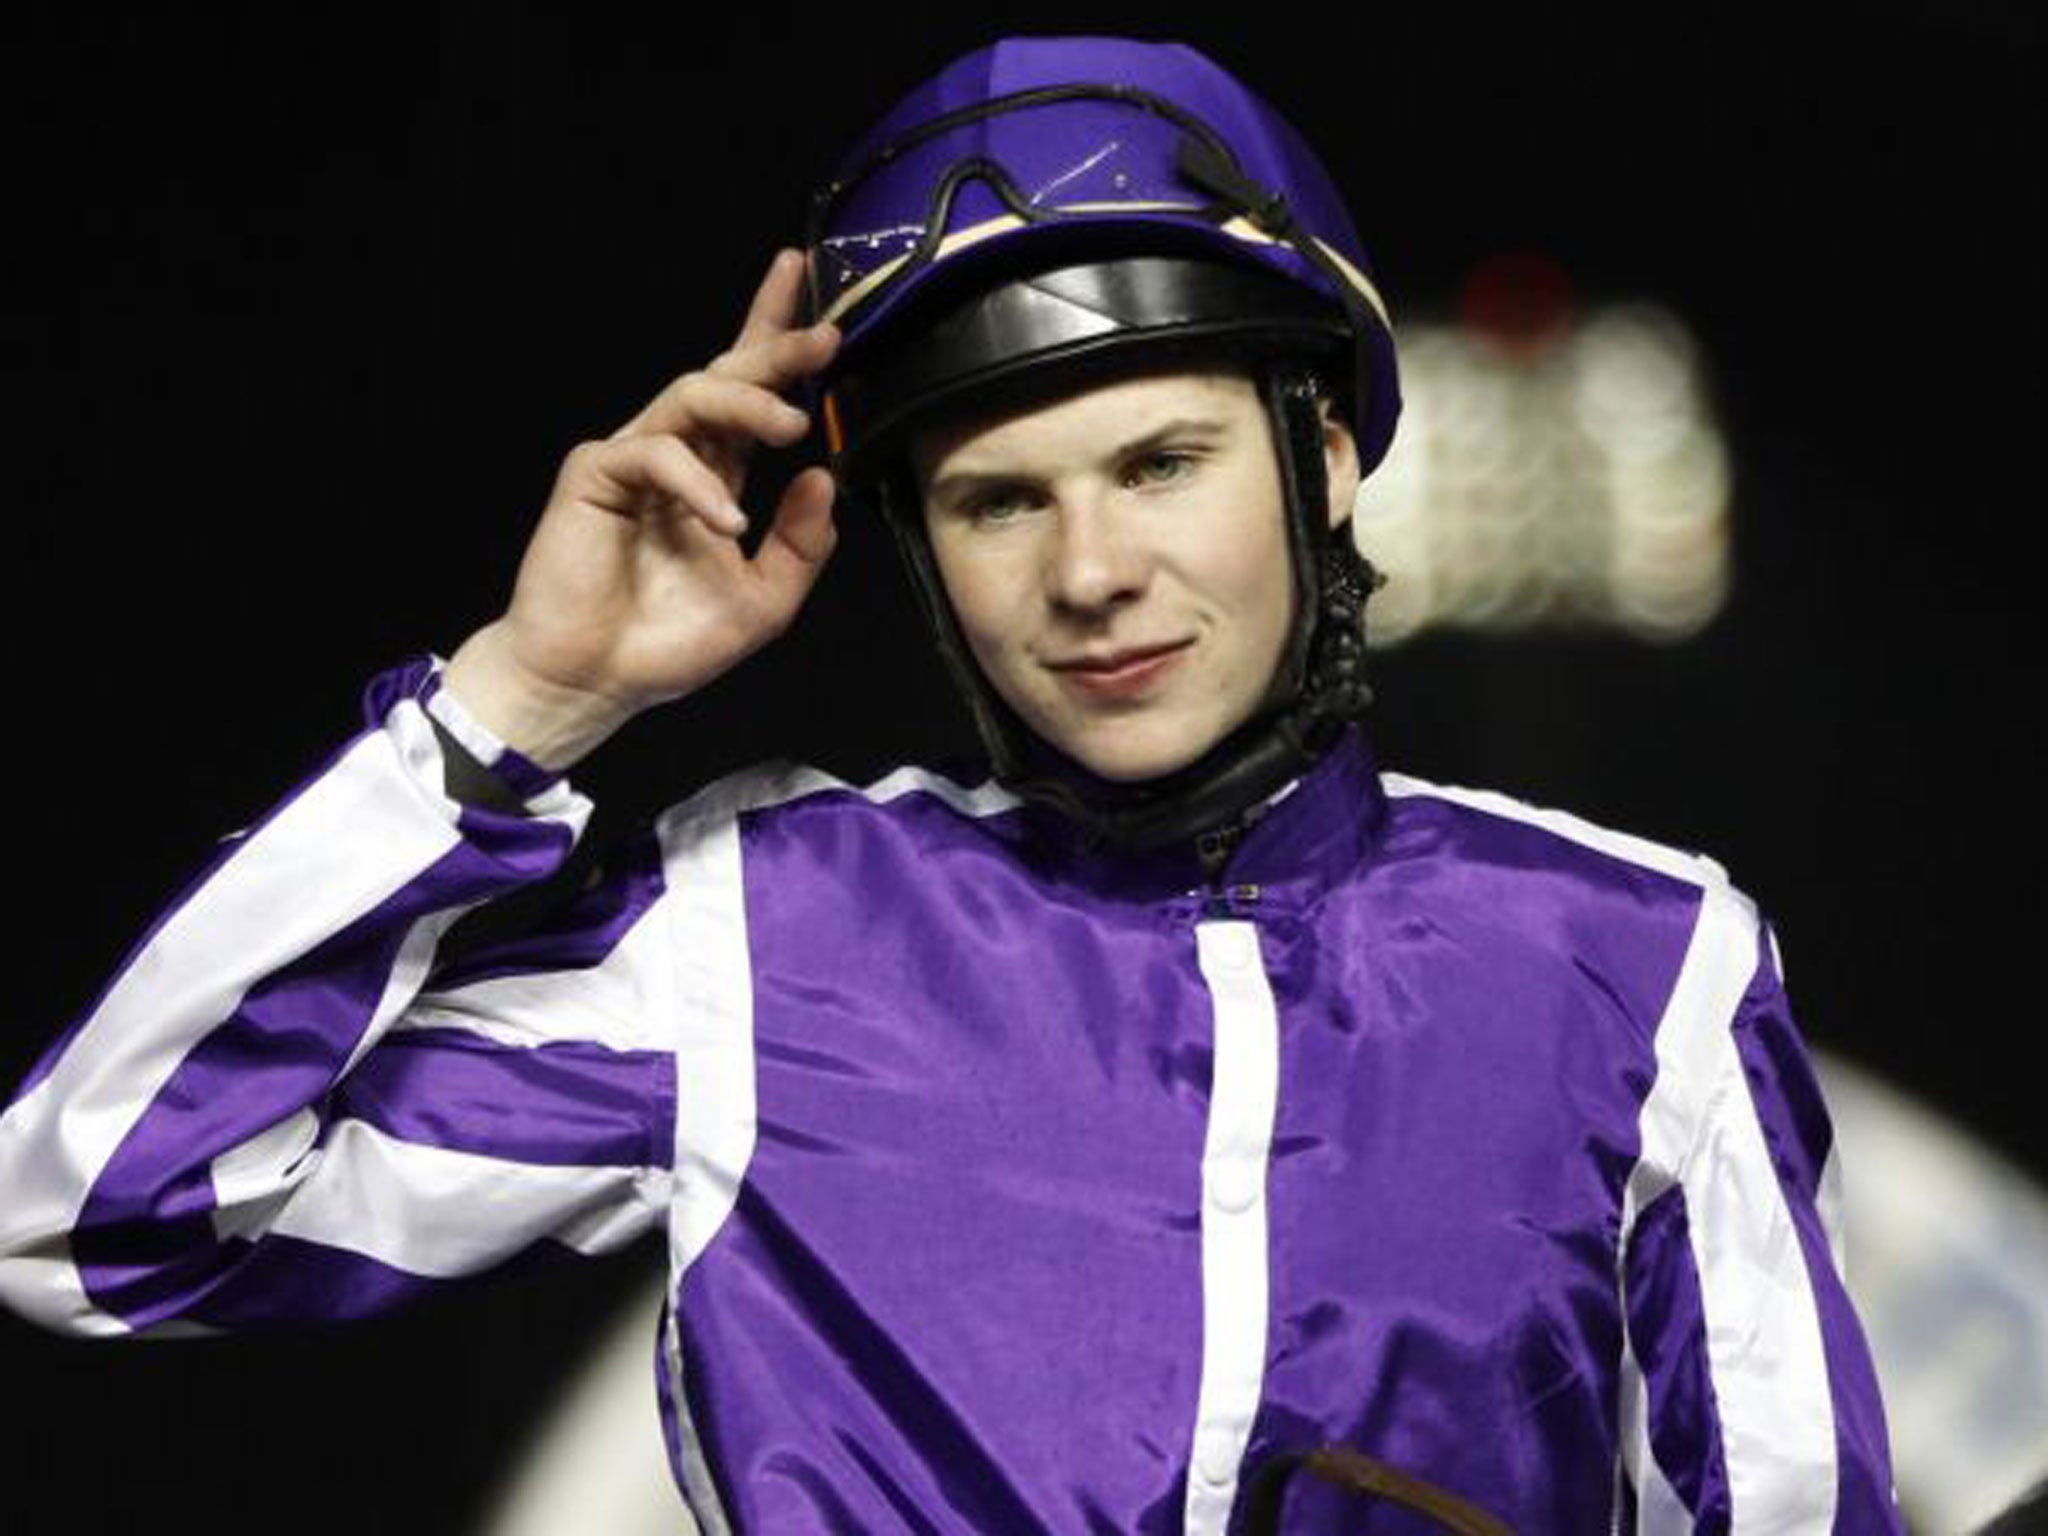 Joseph O’Brien insists all is well with Derby hope Kingsbarns